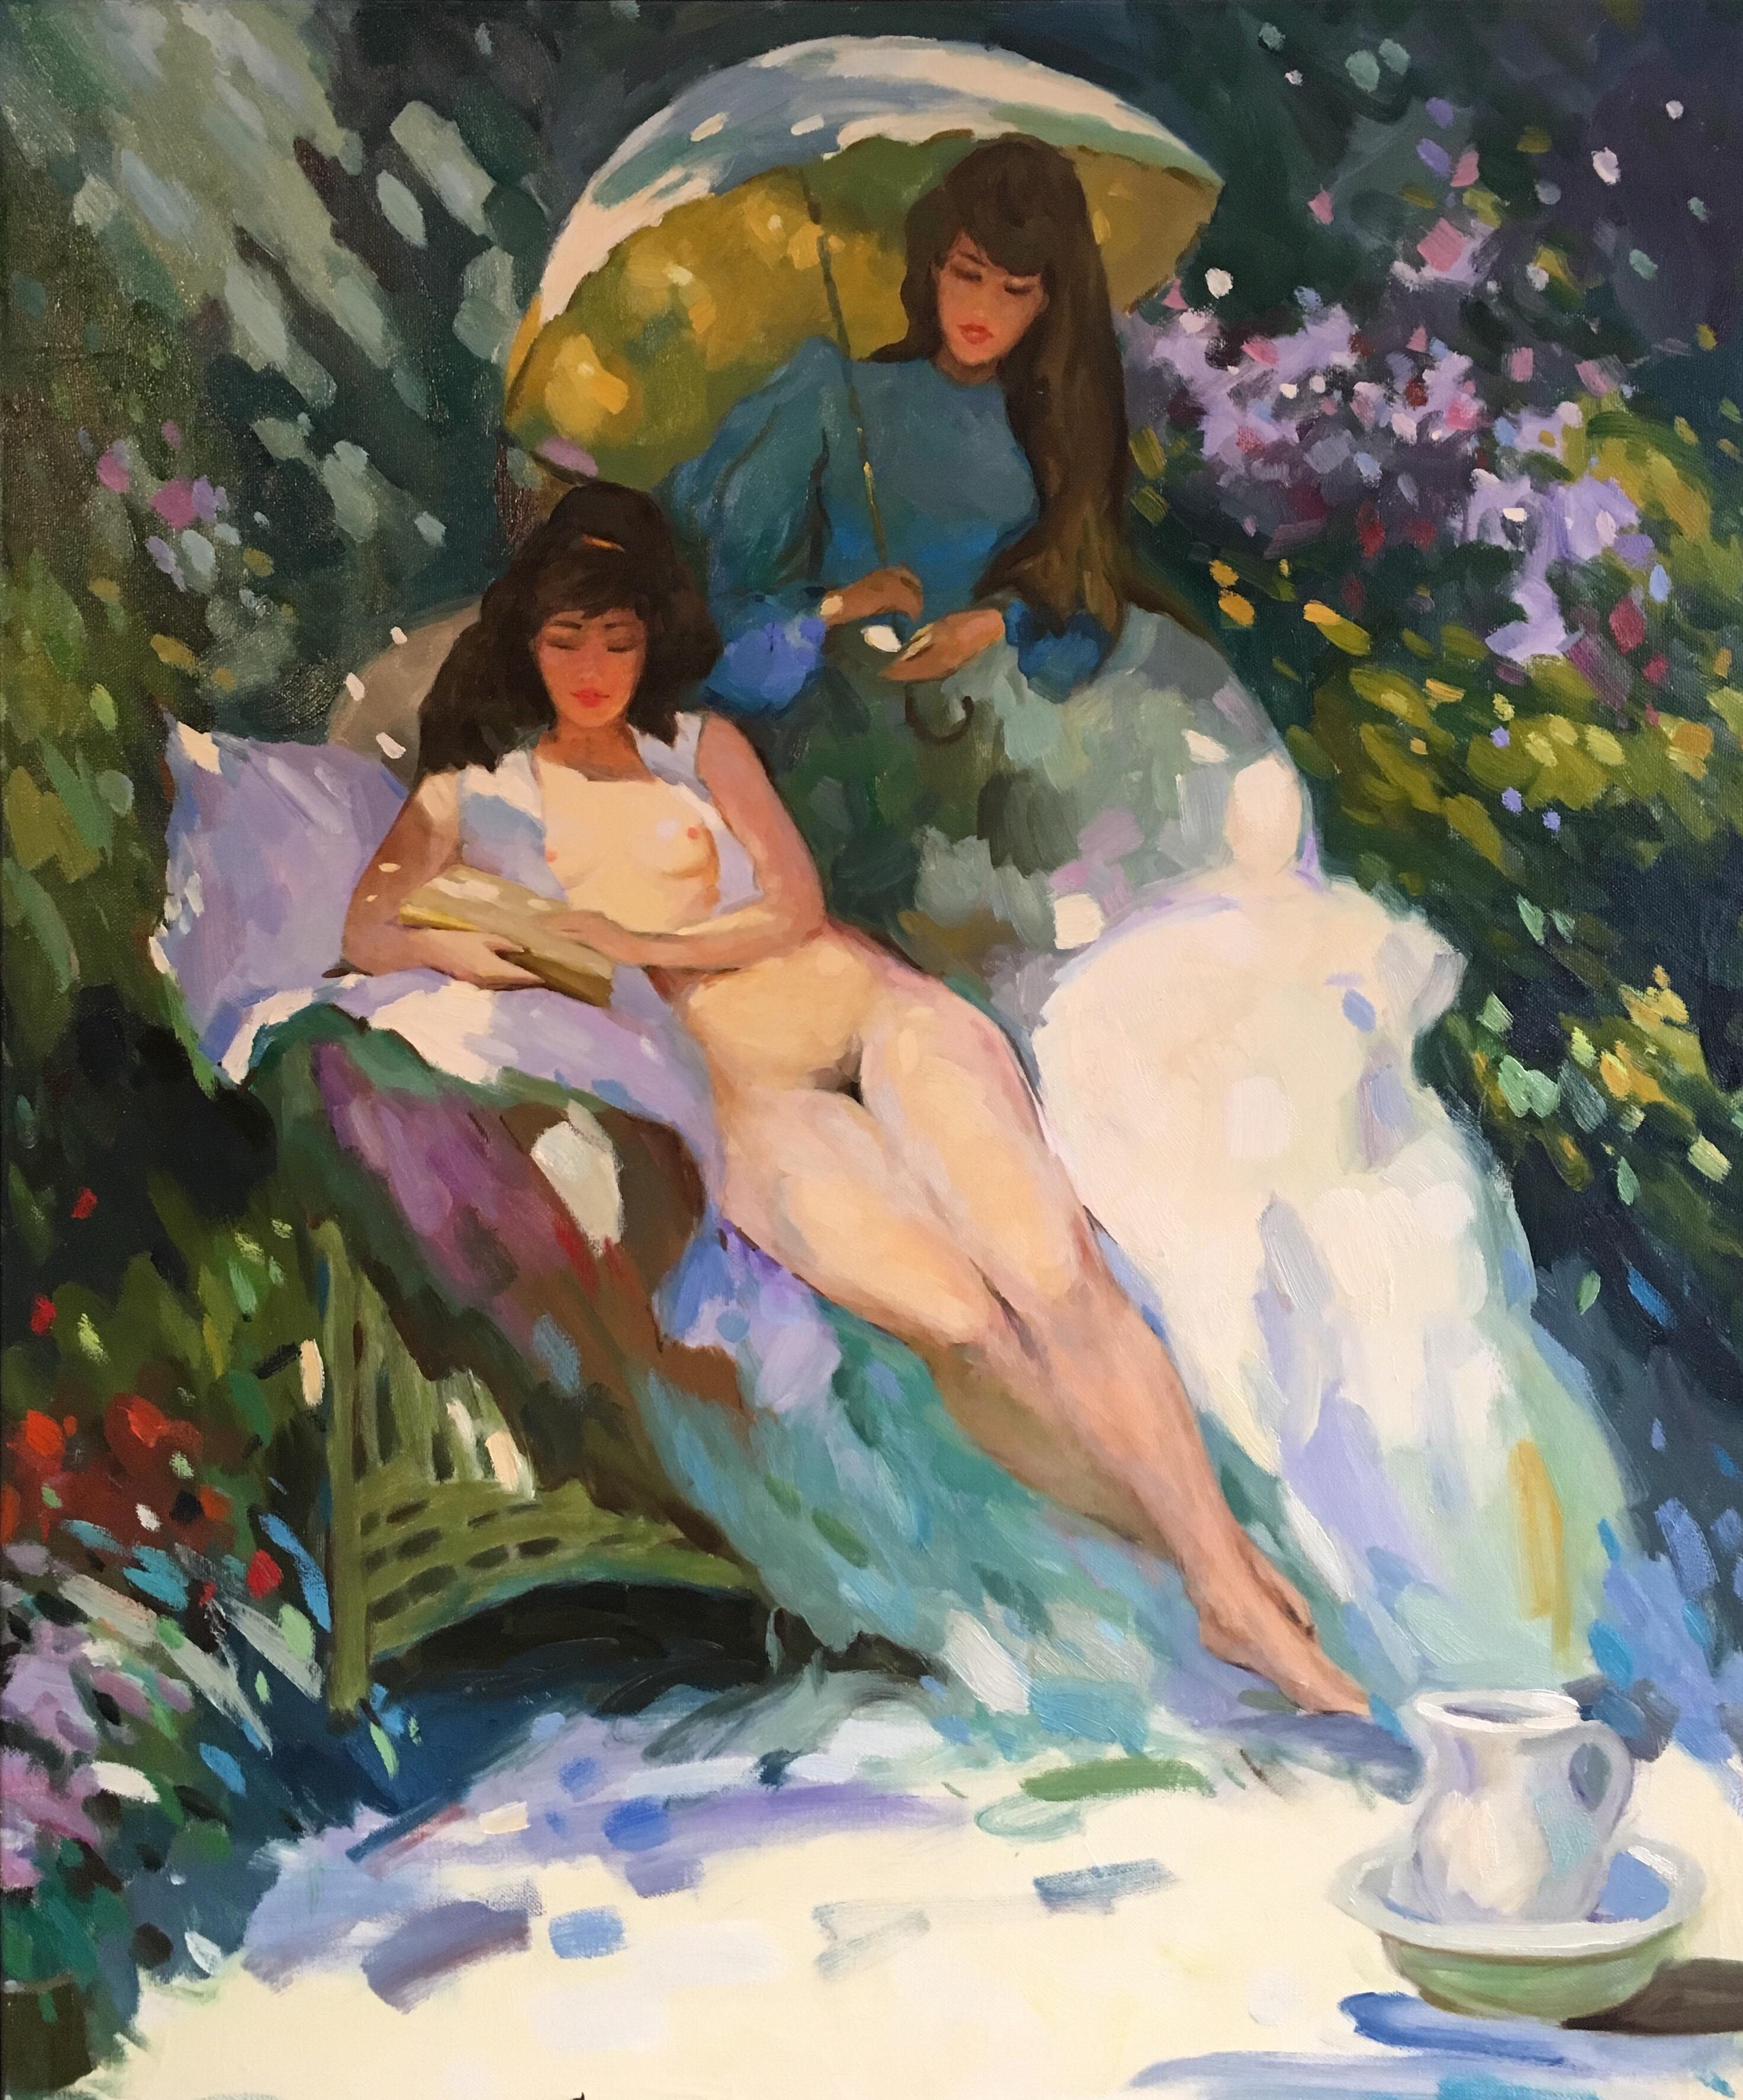 Unknown Figurative Painting - Large Impressionist Nude, Floral Scene, Original Oil Painting